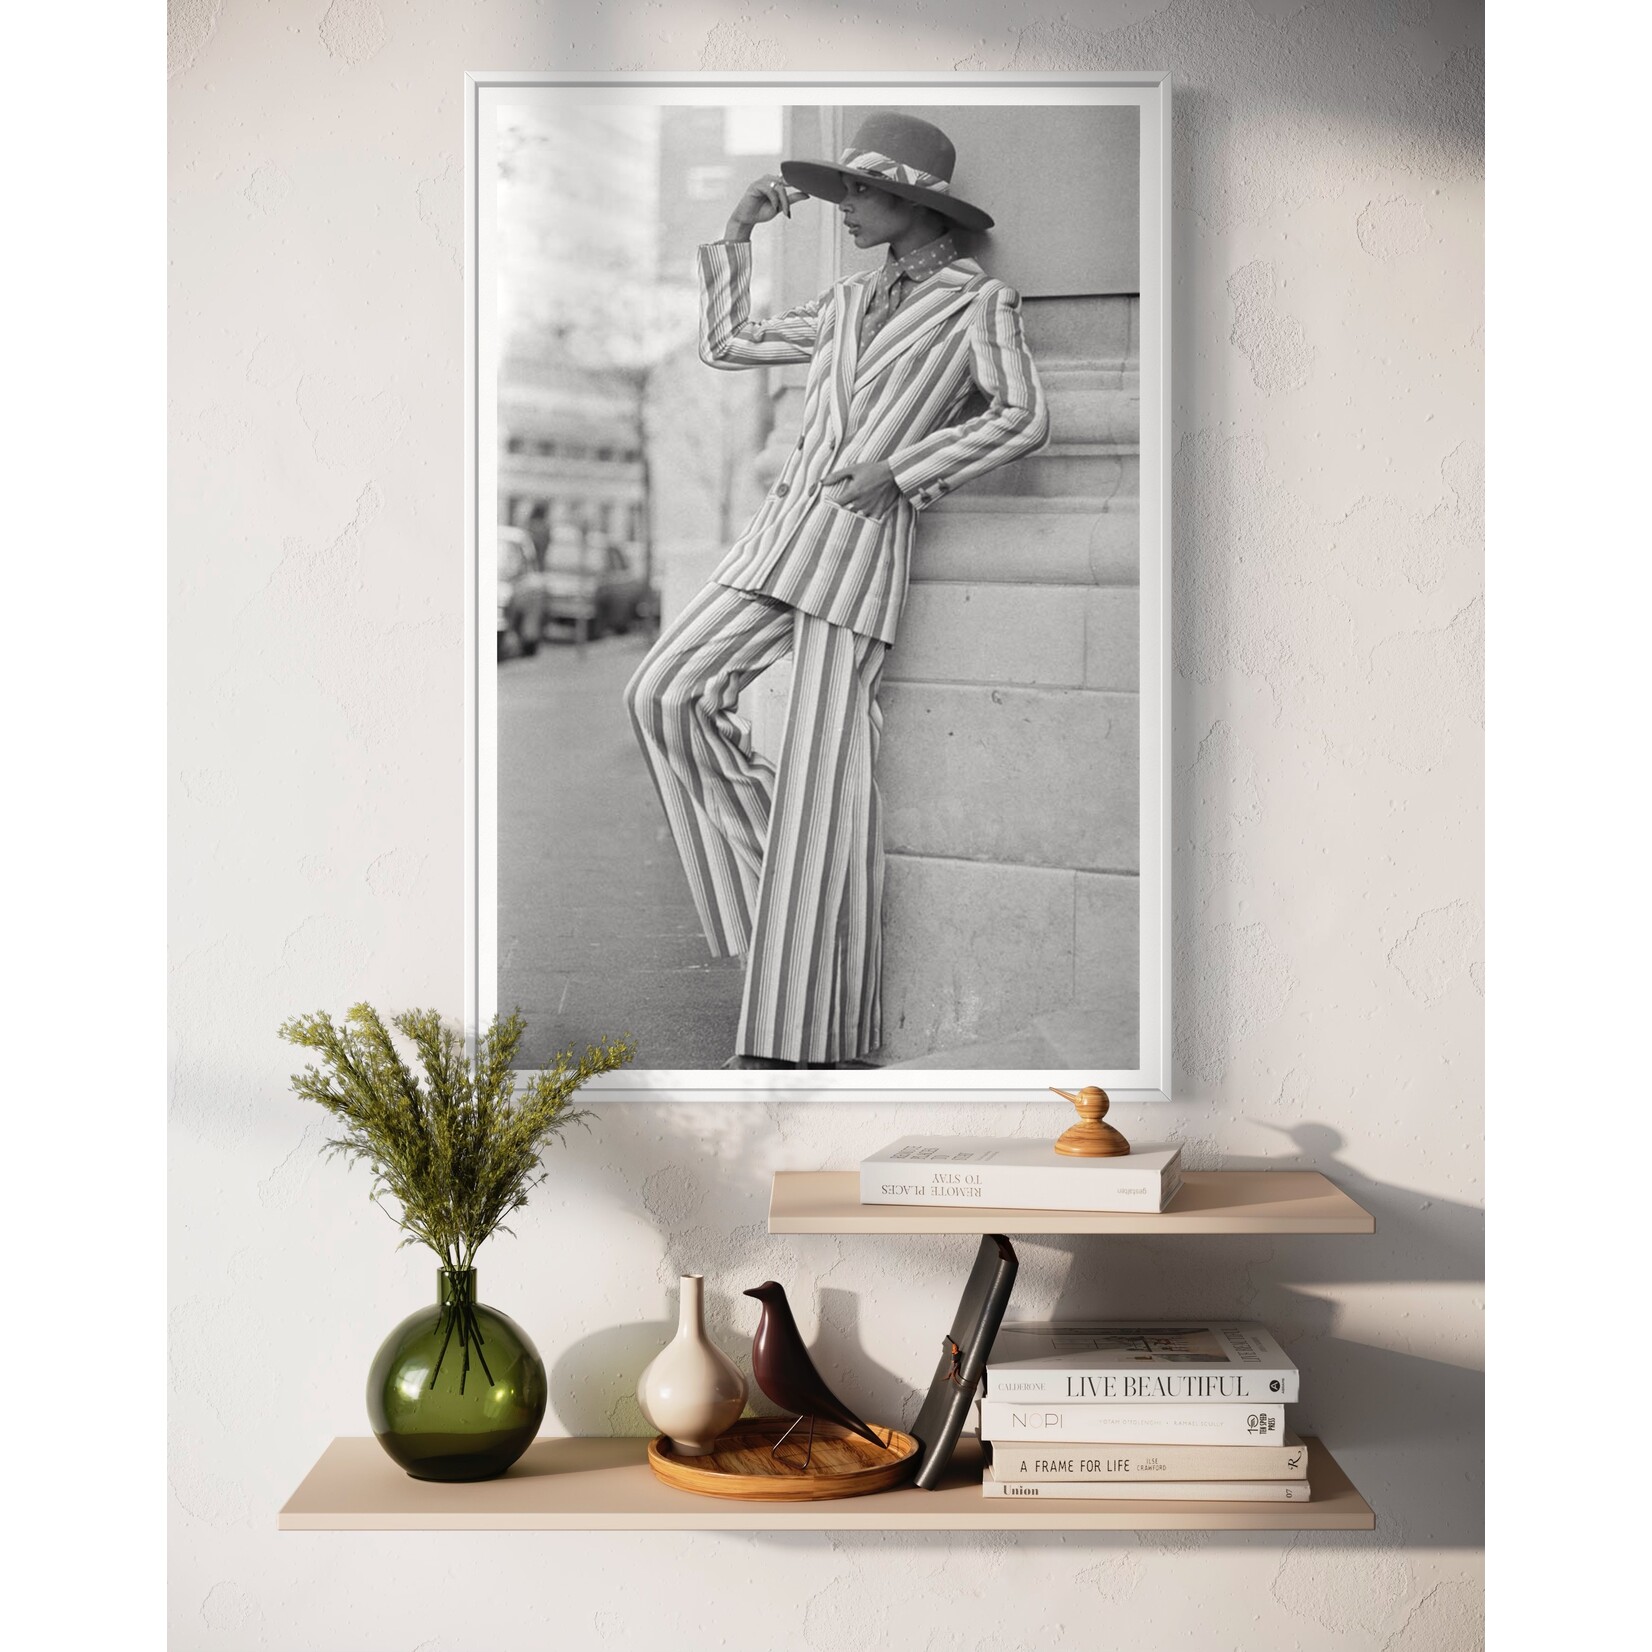 Getty Images Gallery Stripy Chic by Mike McKeown